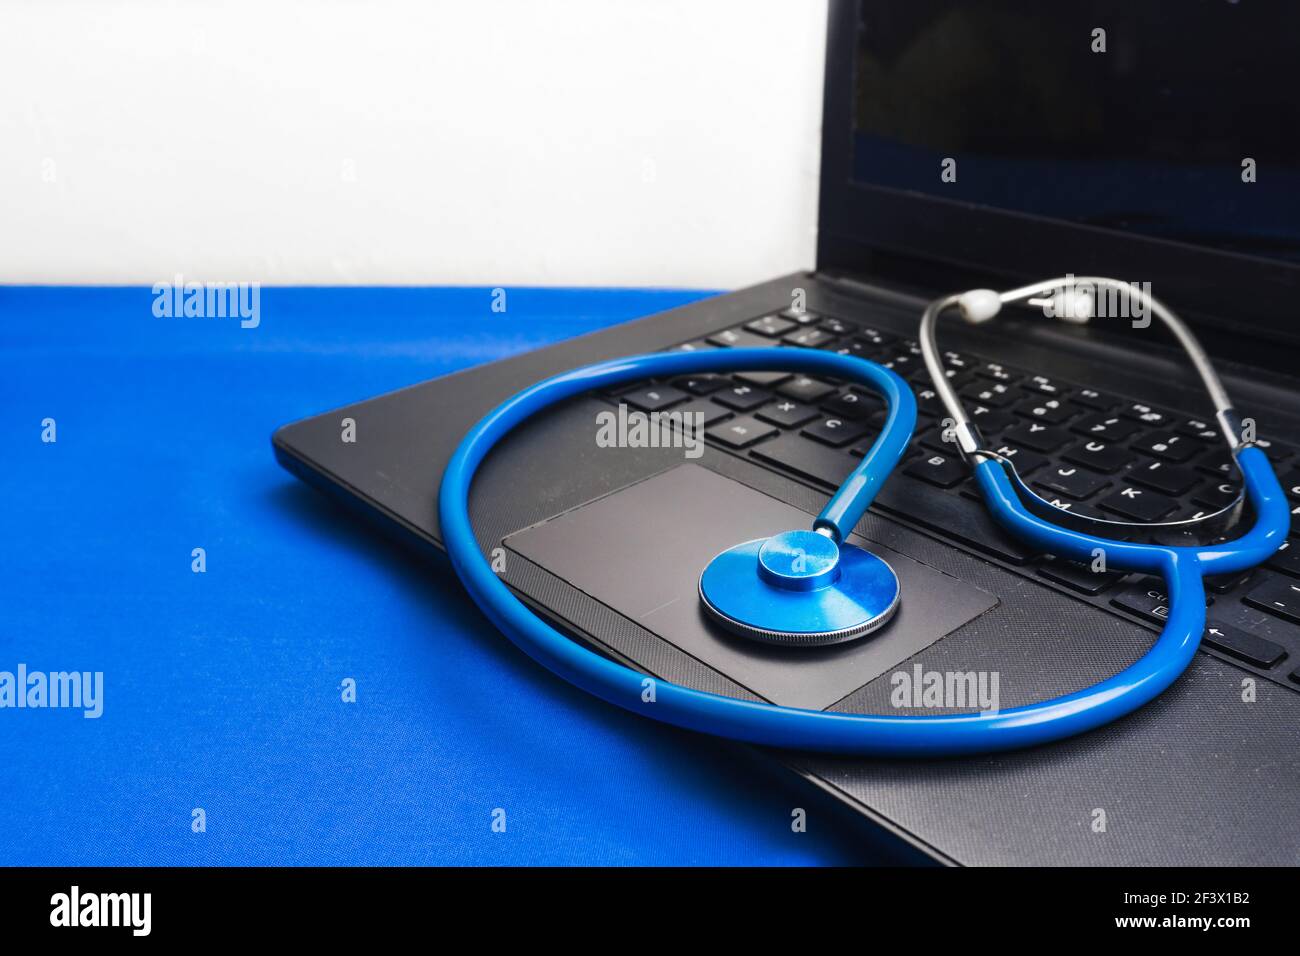 A closeup of a stethoscope on a black laptop on the blue surface Stock Photo